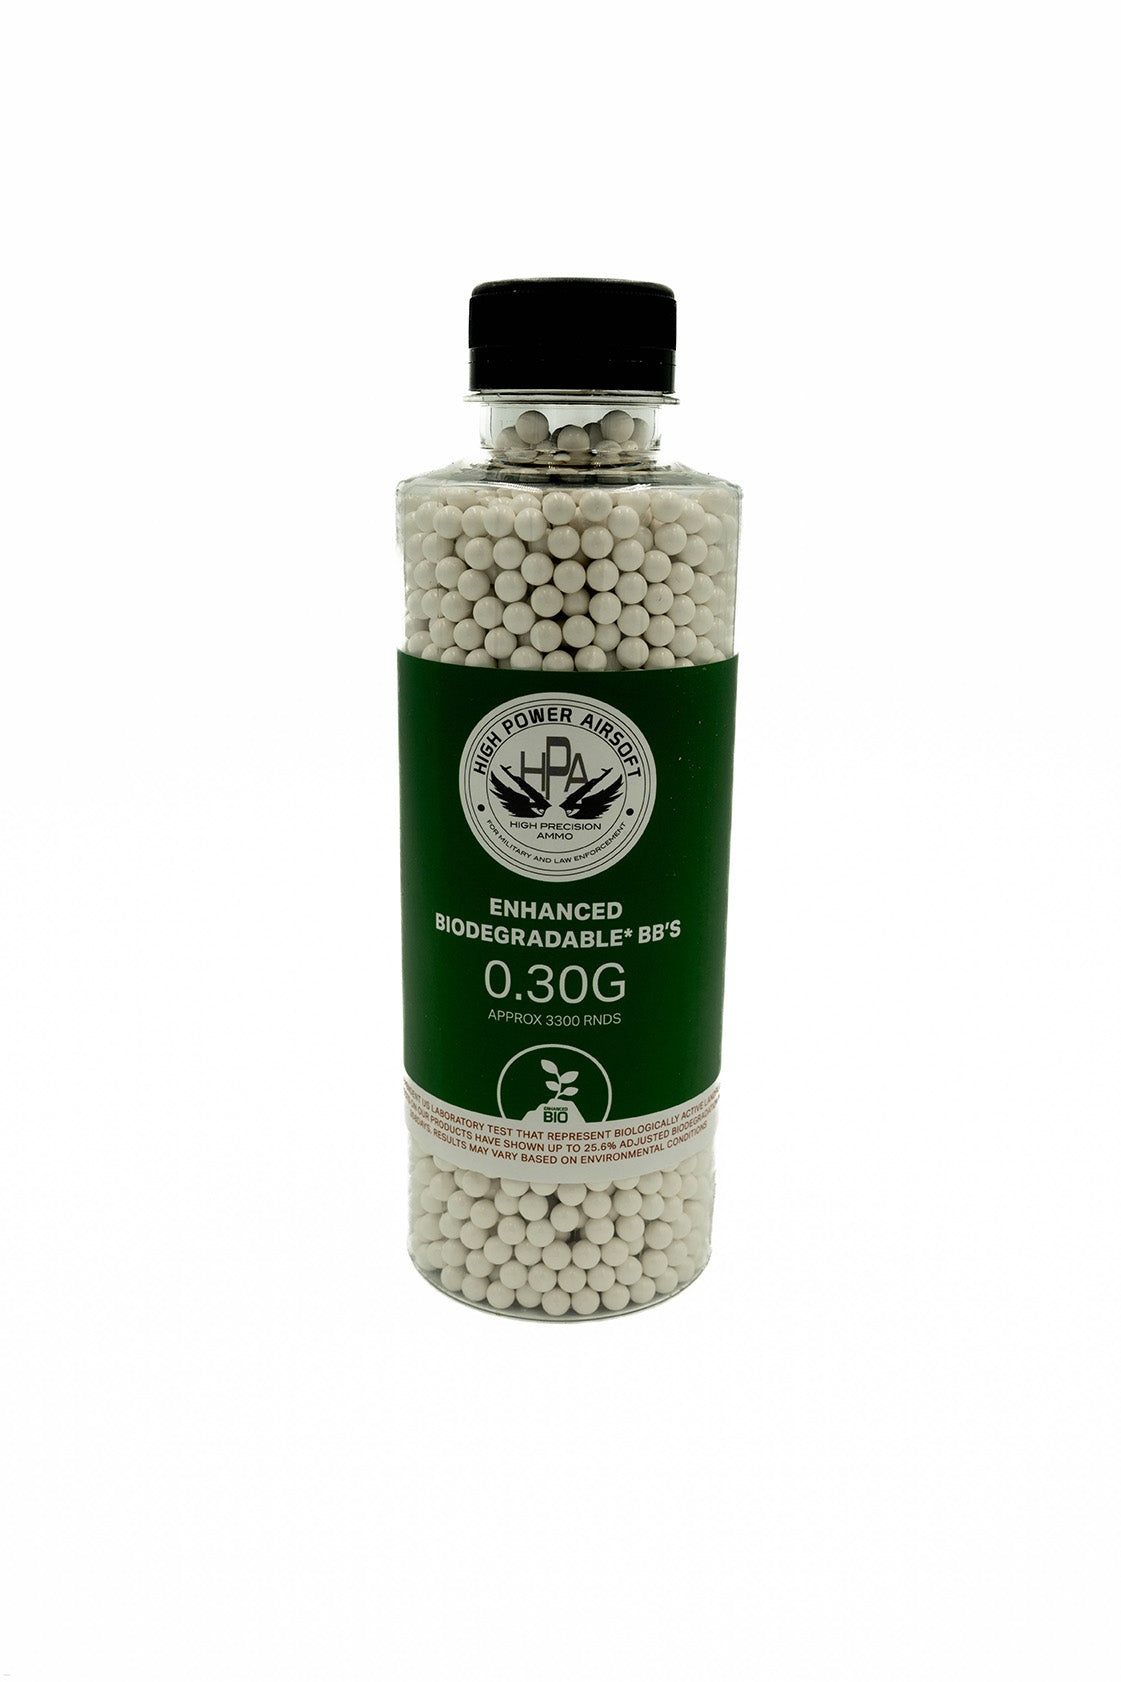 HPA 0.30G Enhanced Biodegradable BB (Approx 3,300rds)